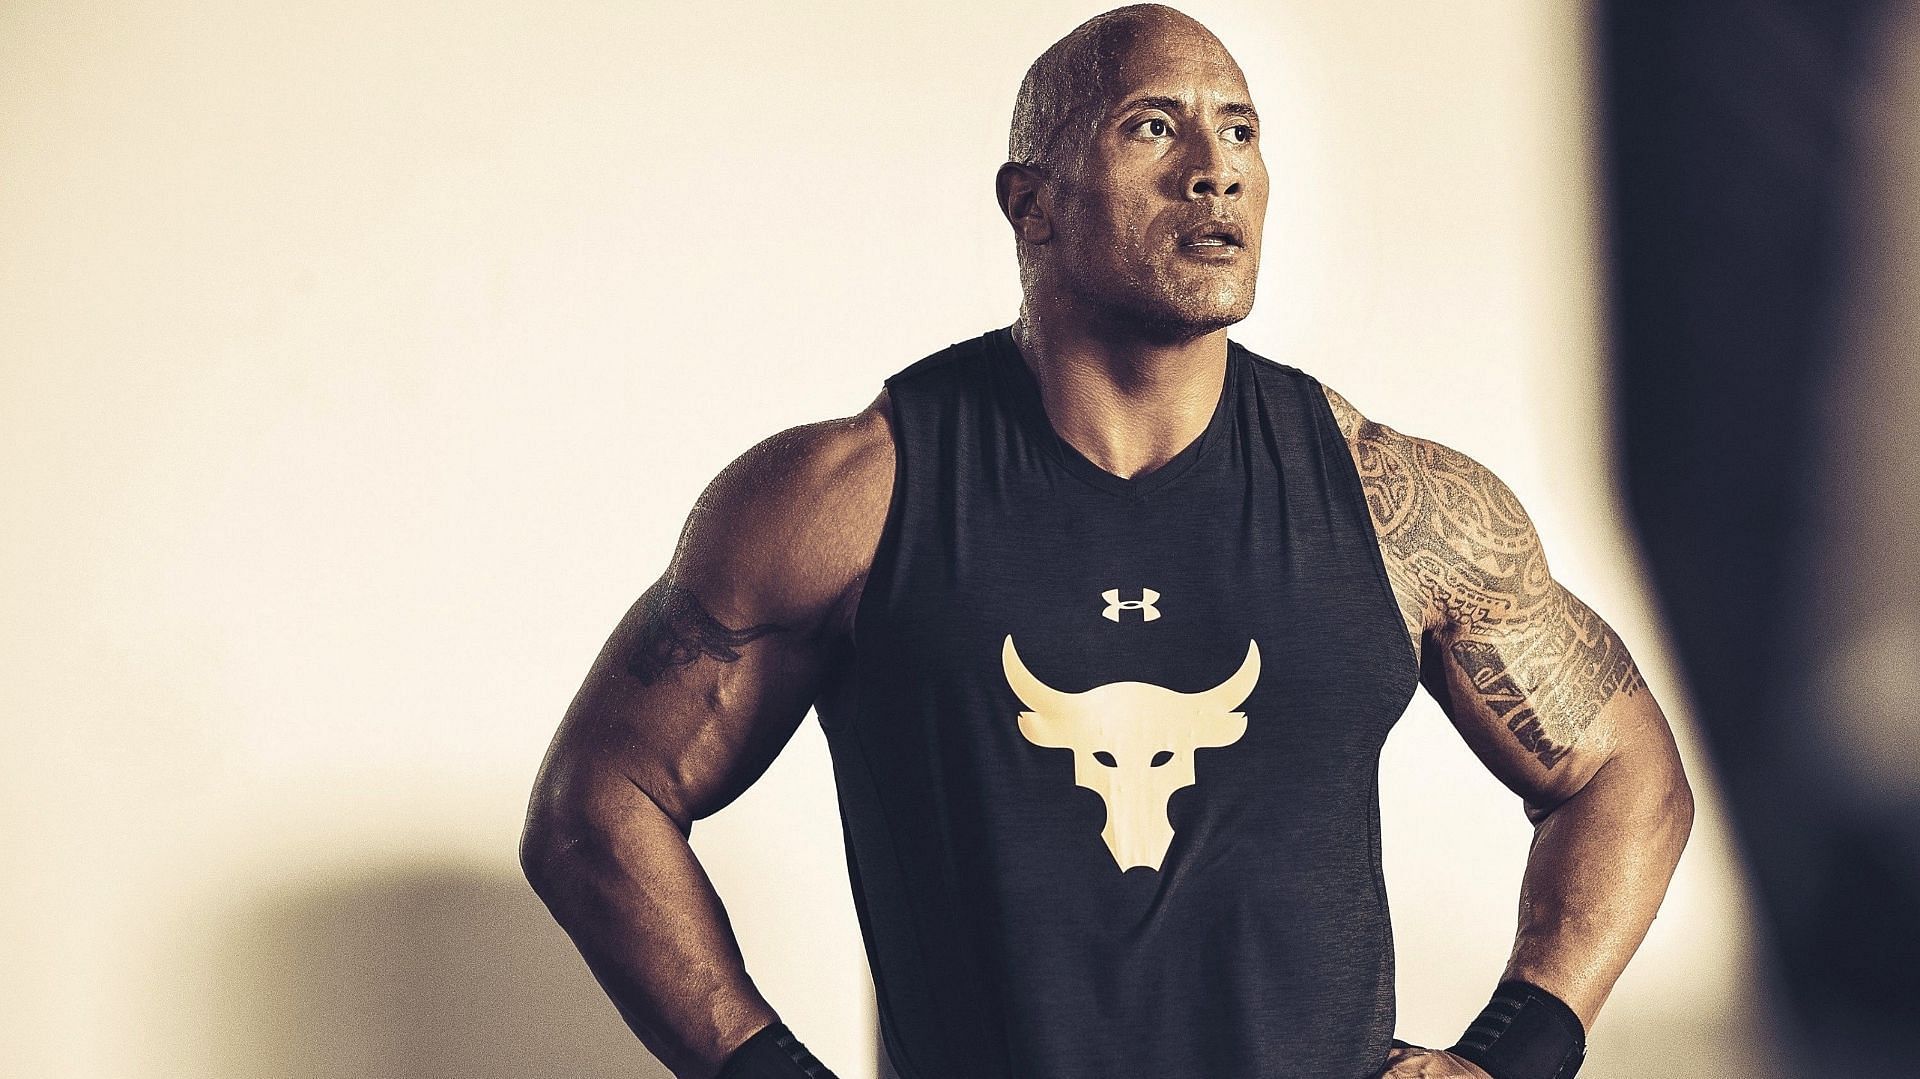 The Rock has yet to make his much-awaited WWE return